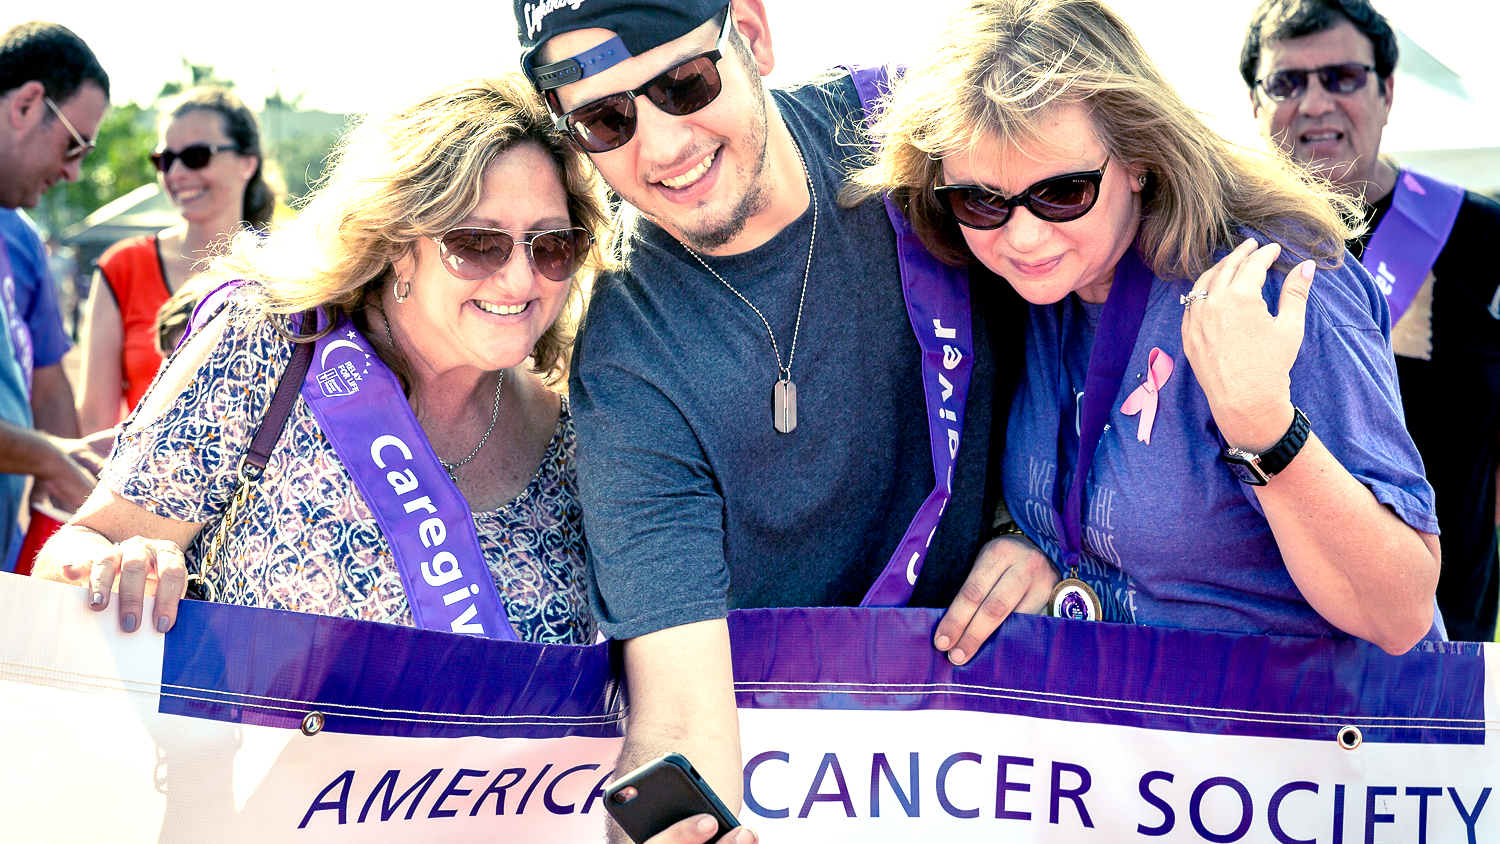 'Survivors Standing Strong' at Relay For Life Parkland Coral Springs April 13 3